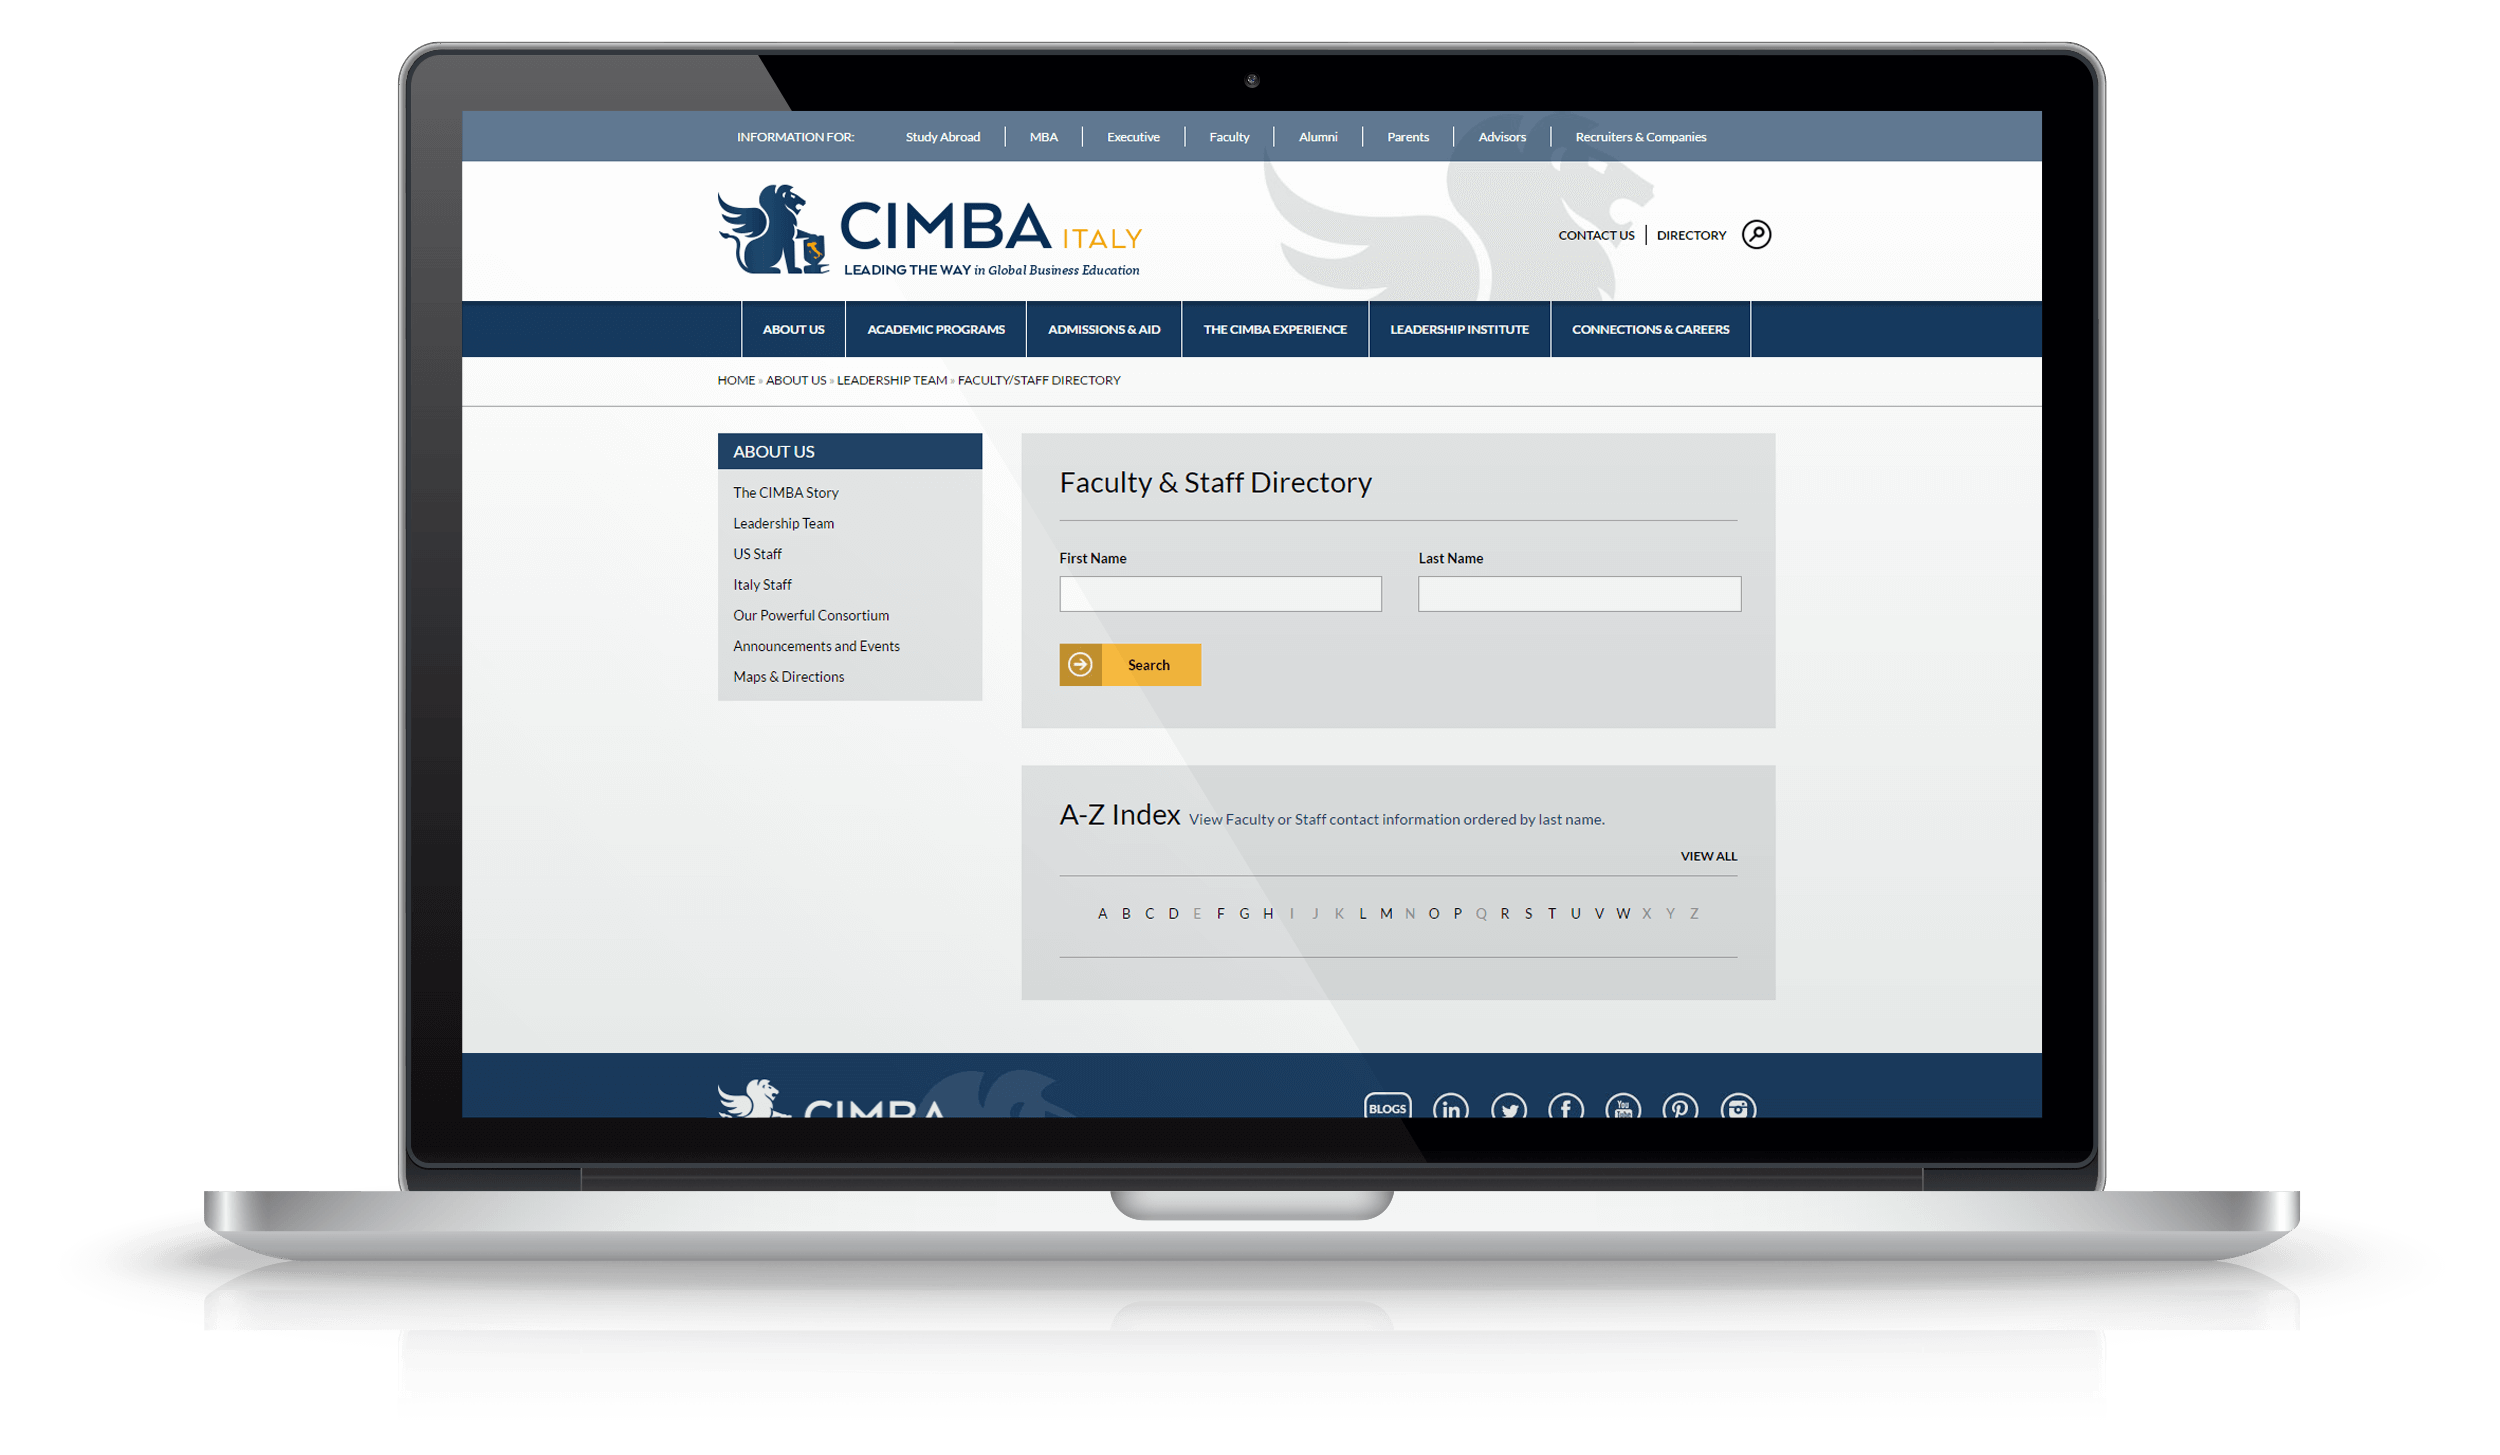 Pixelnation Project: CIMBA Italy Website - Directory Page